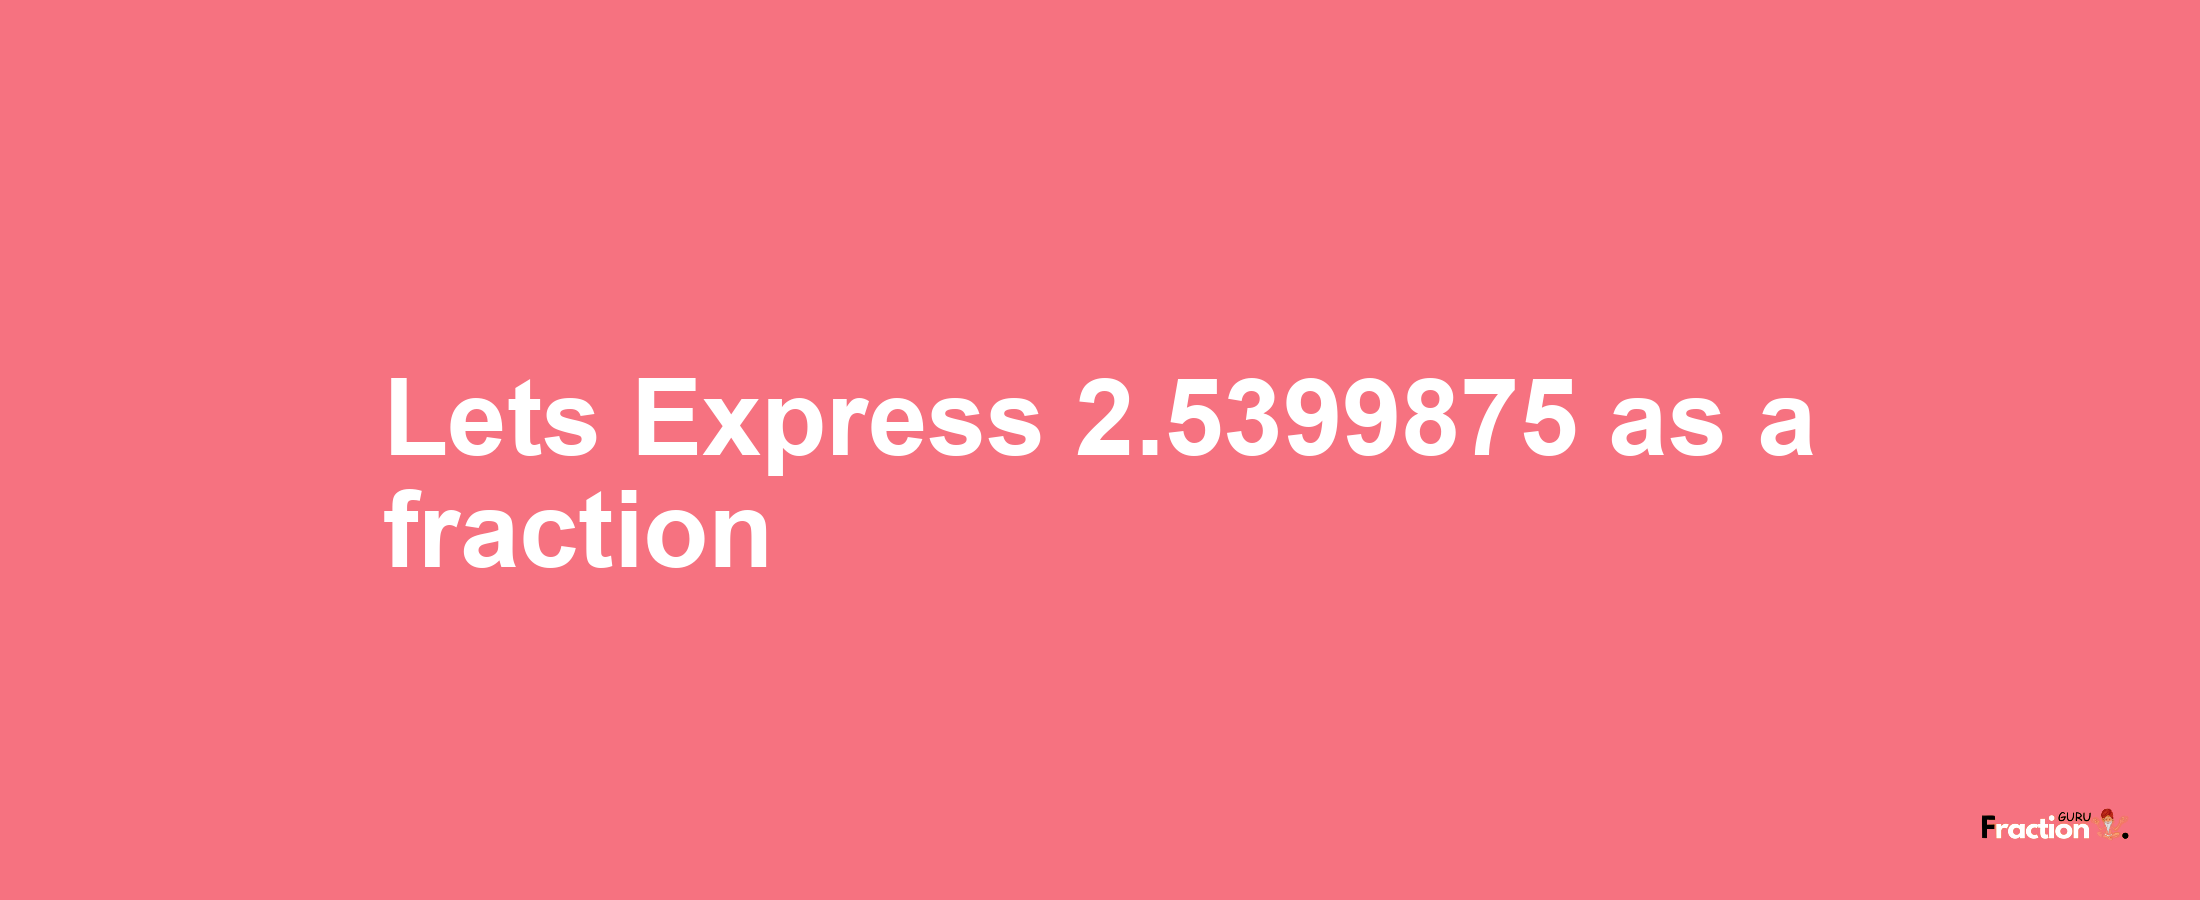 Lets Express 2.5399875 as afraction